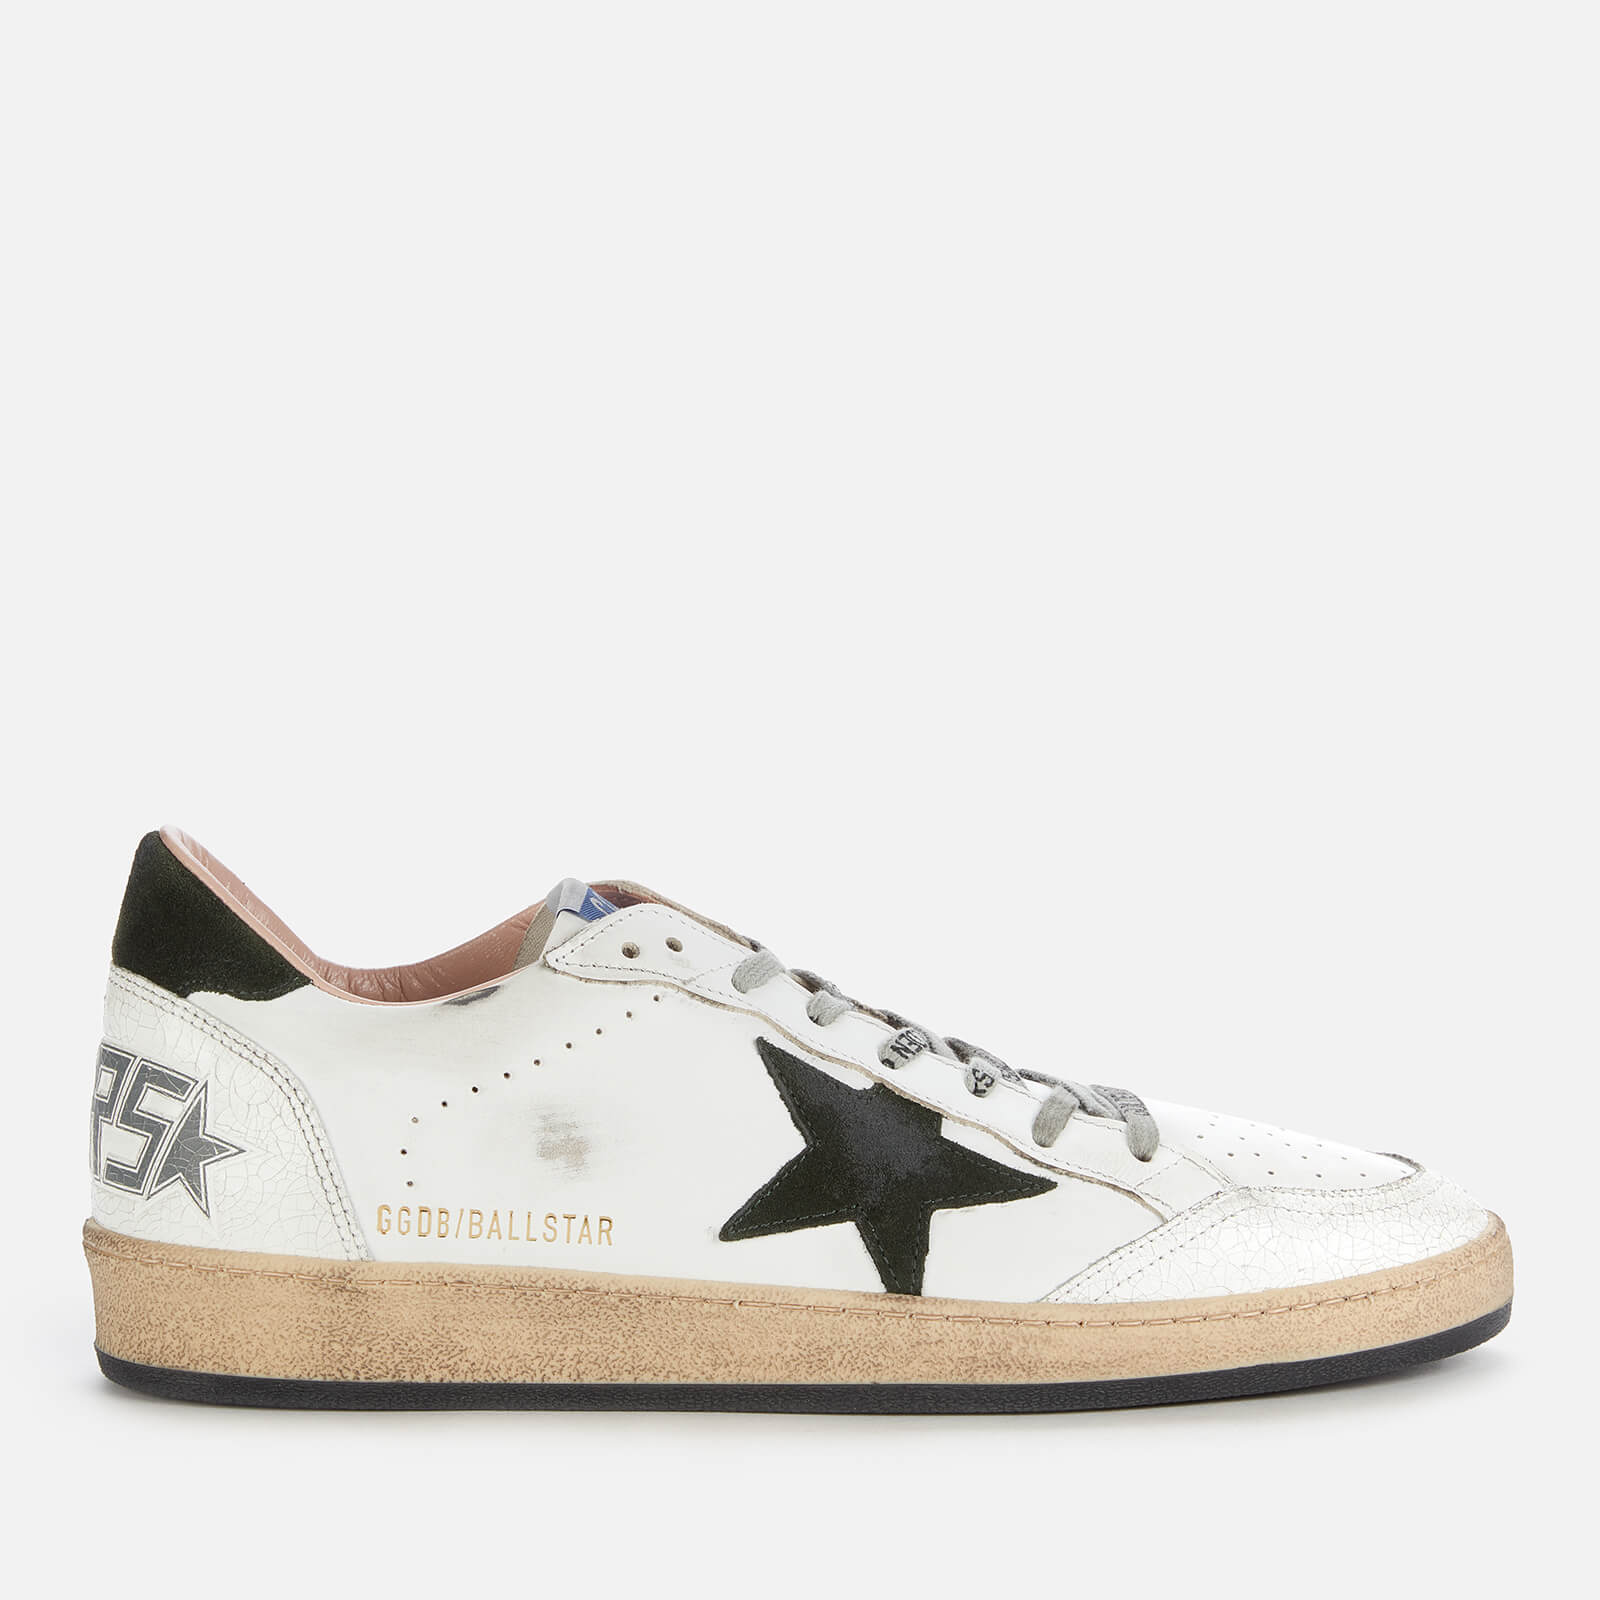 Golden Goose Deluxe Brand Men's Ball Star Leather Trainers - White/Military Green - UK 10